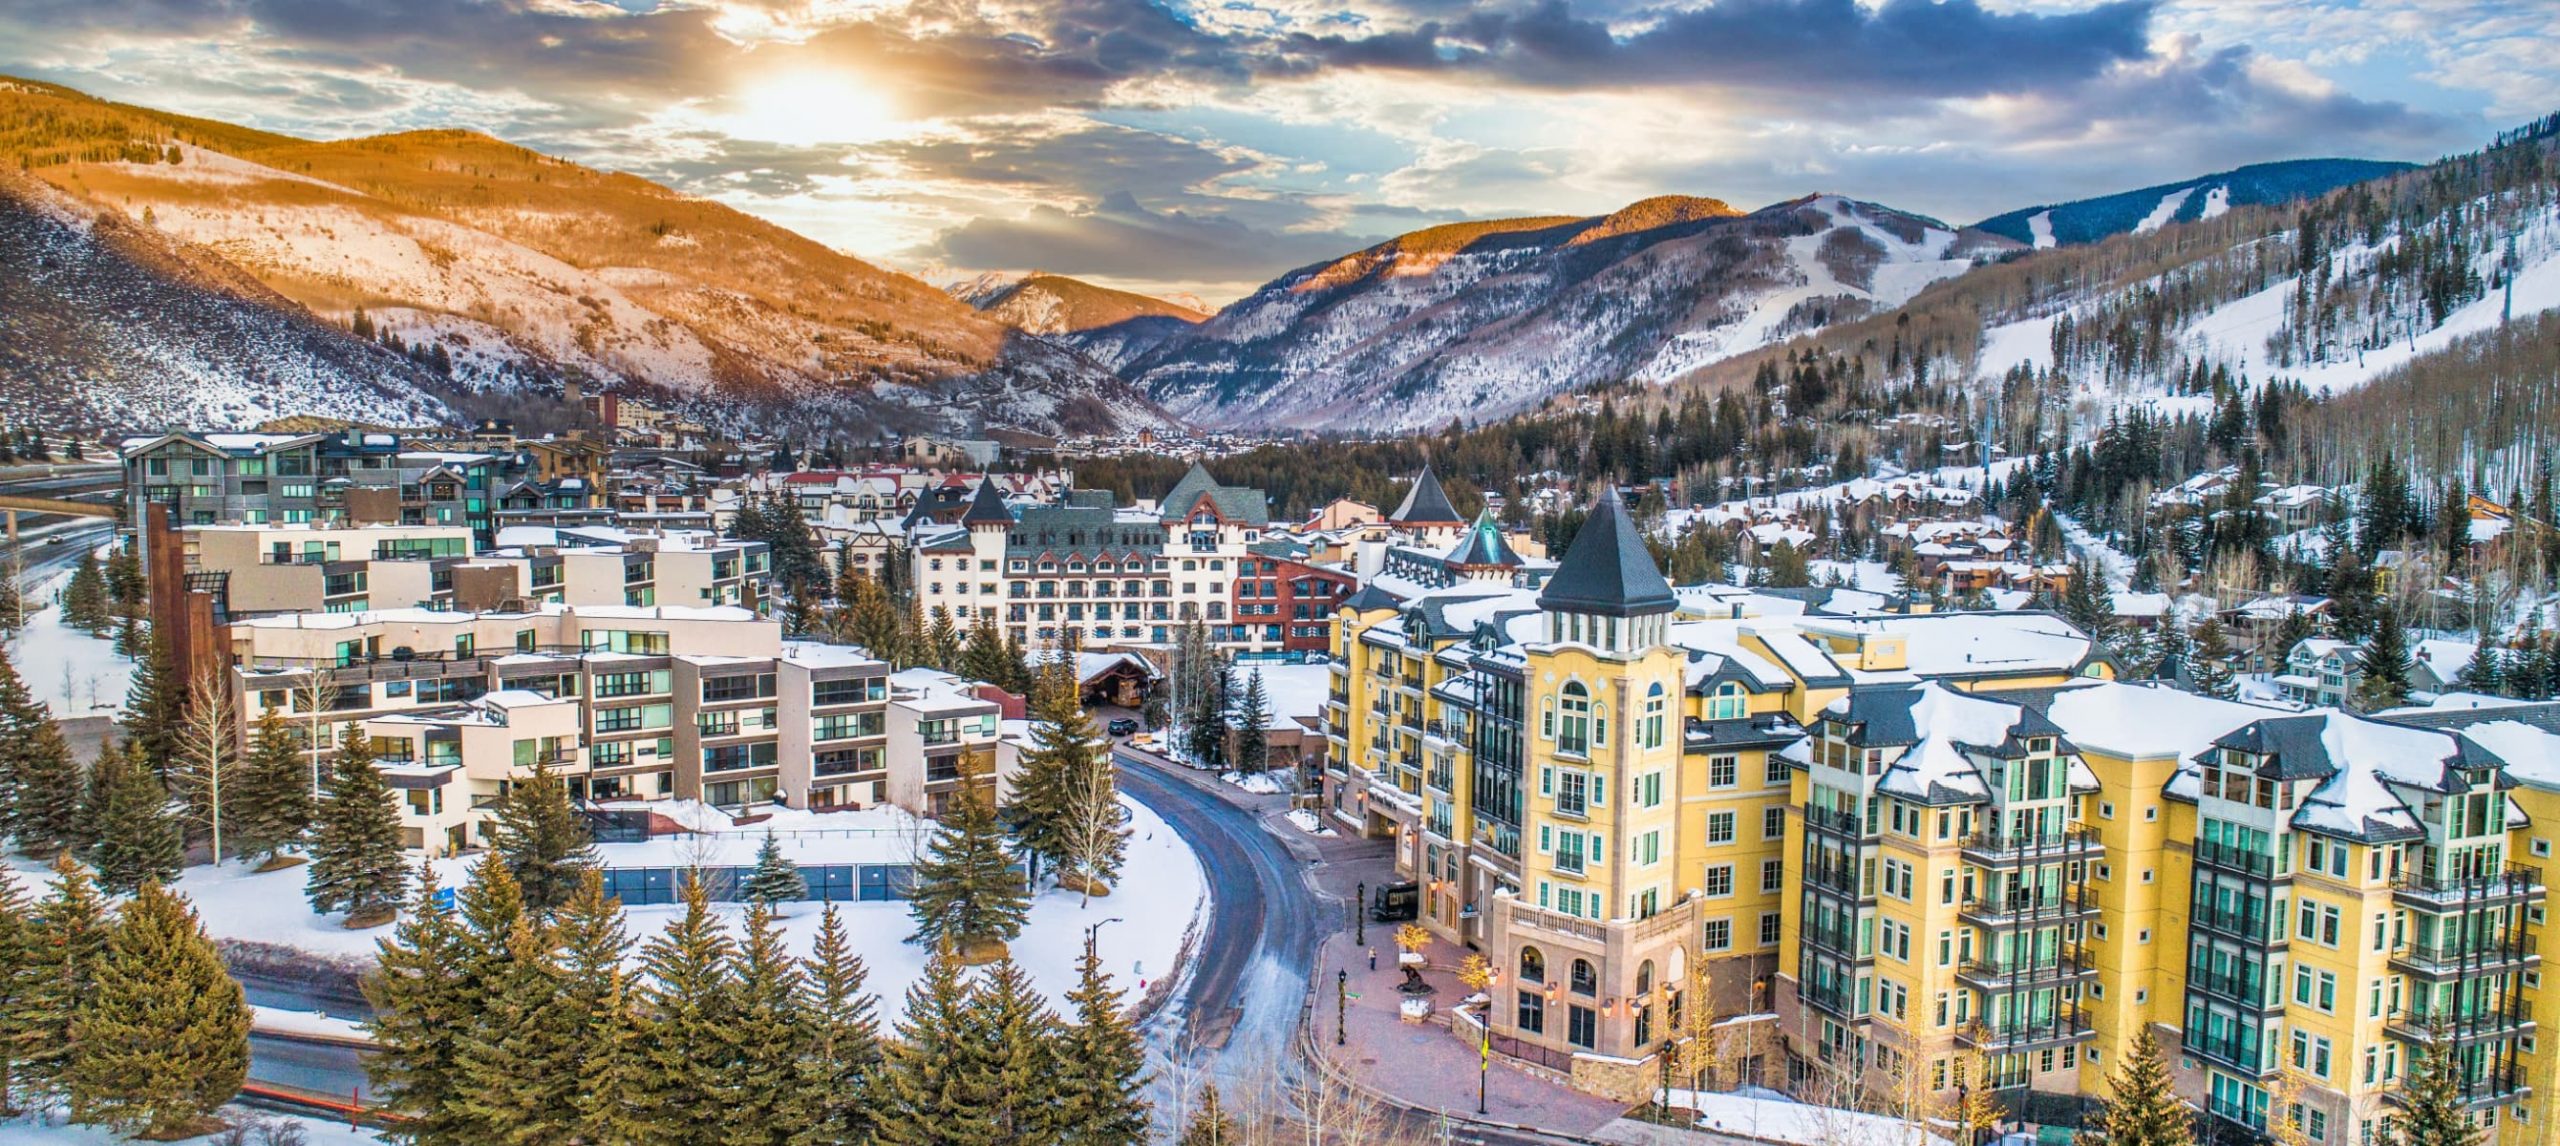 8 Amazing Hotels In Colorado That You’ll Love